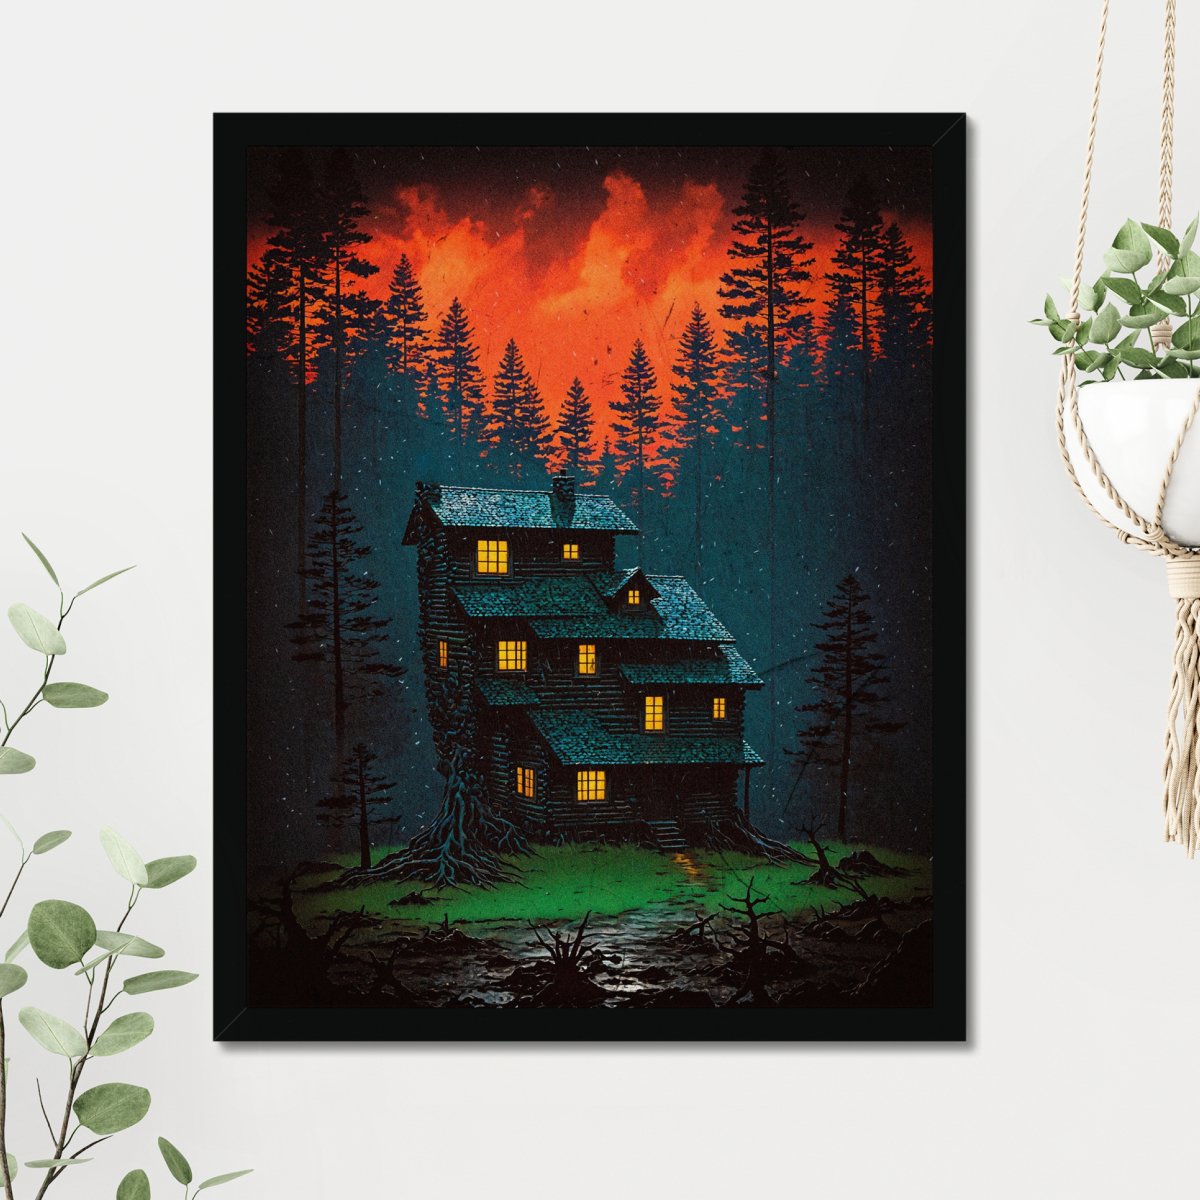 House of terrors - Art print - Poster - Ever colorful